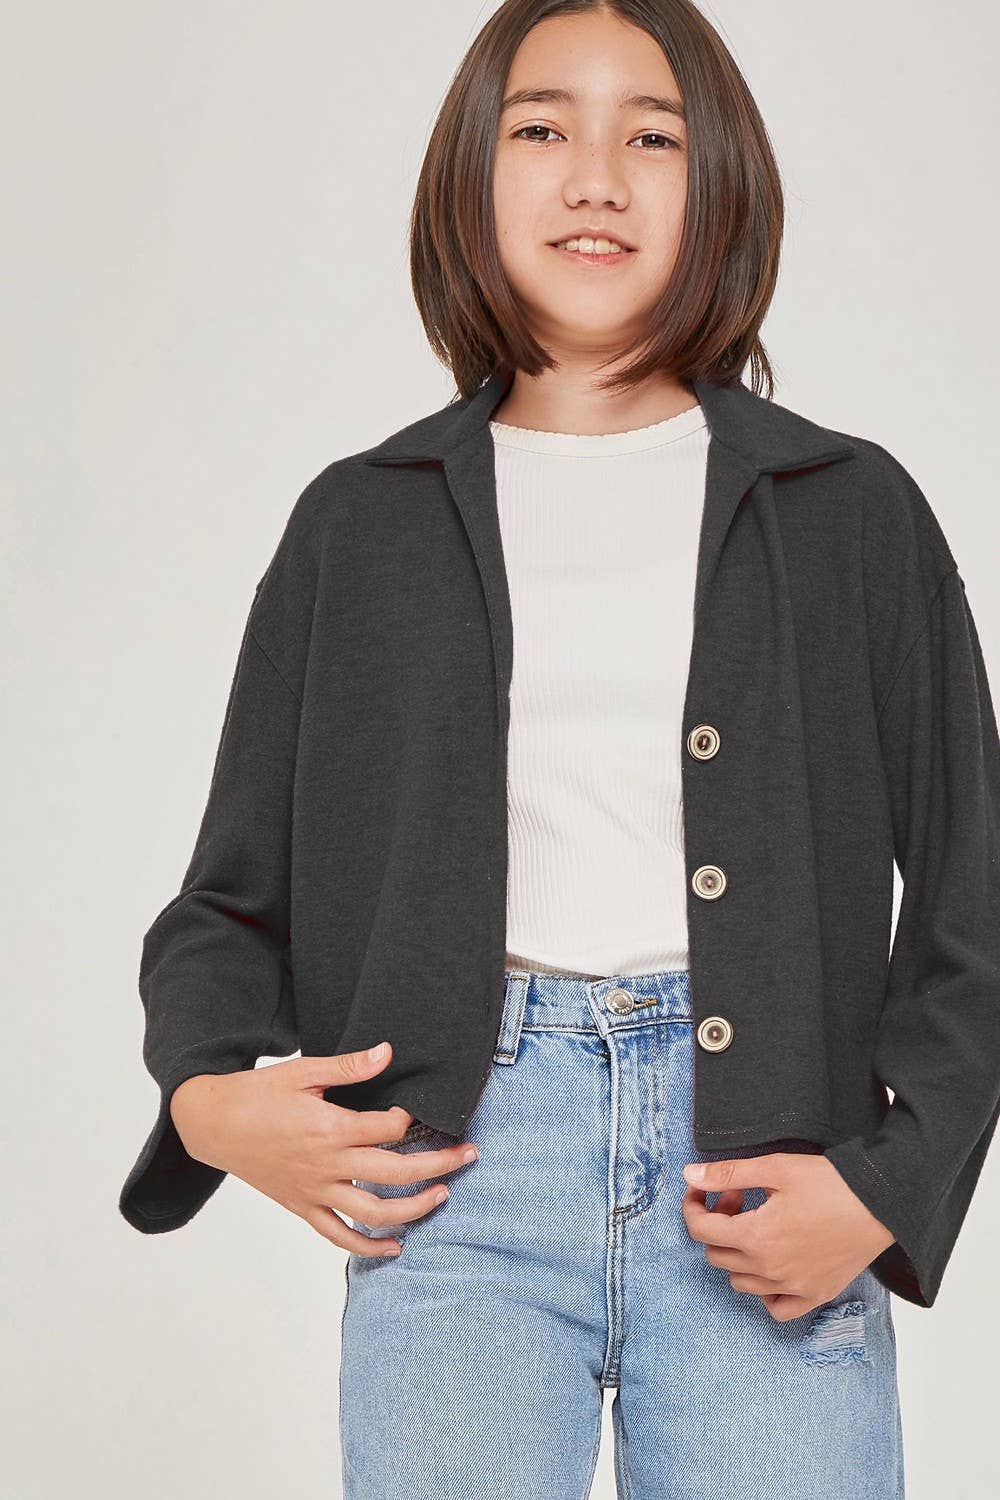 Solid Brush Knit Collar Button Cardigan: Charcoal